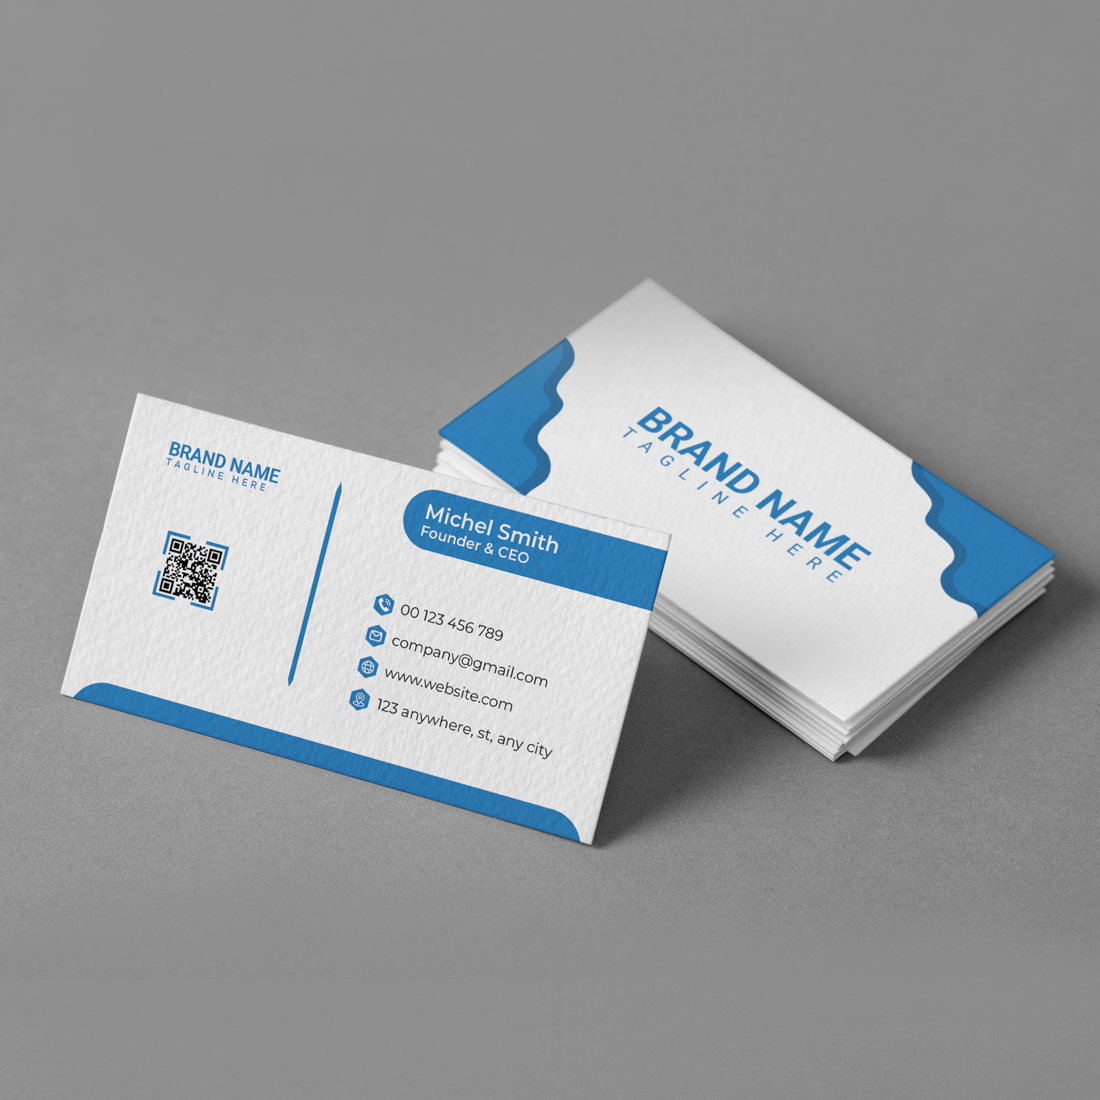 Creative Modern Visiting Card Template Design cover image.